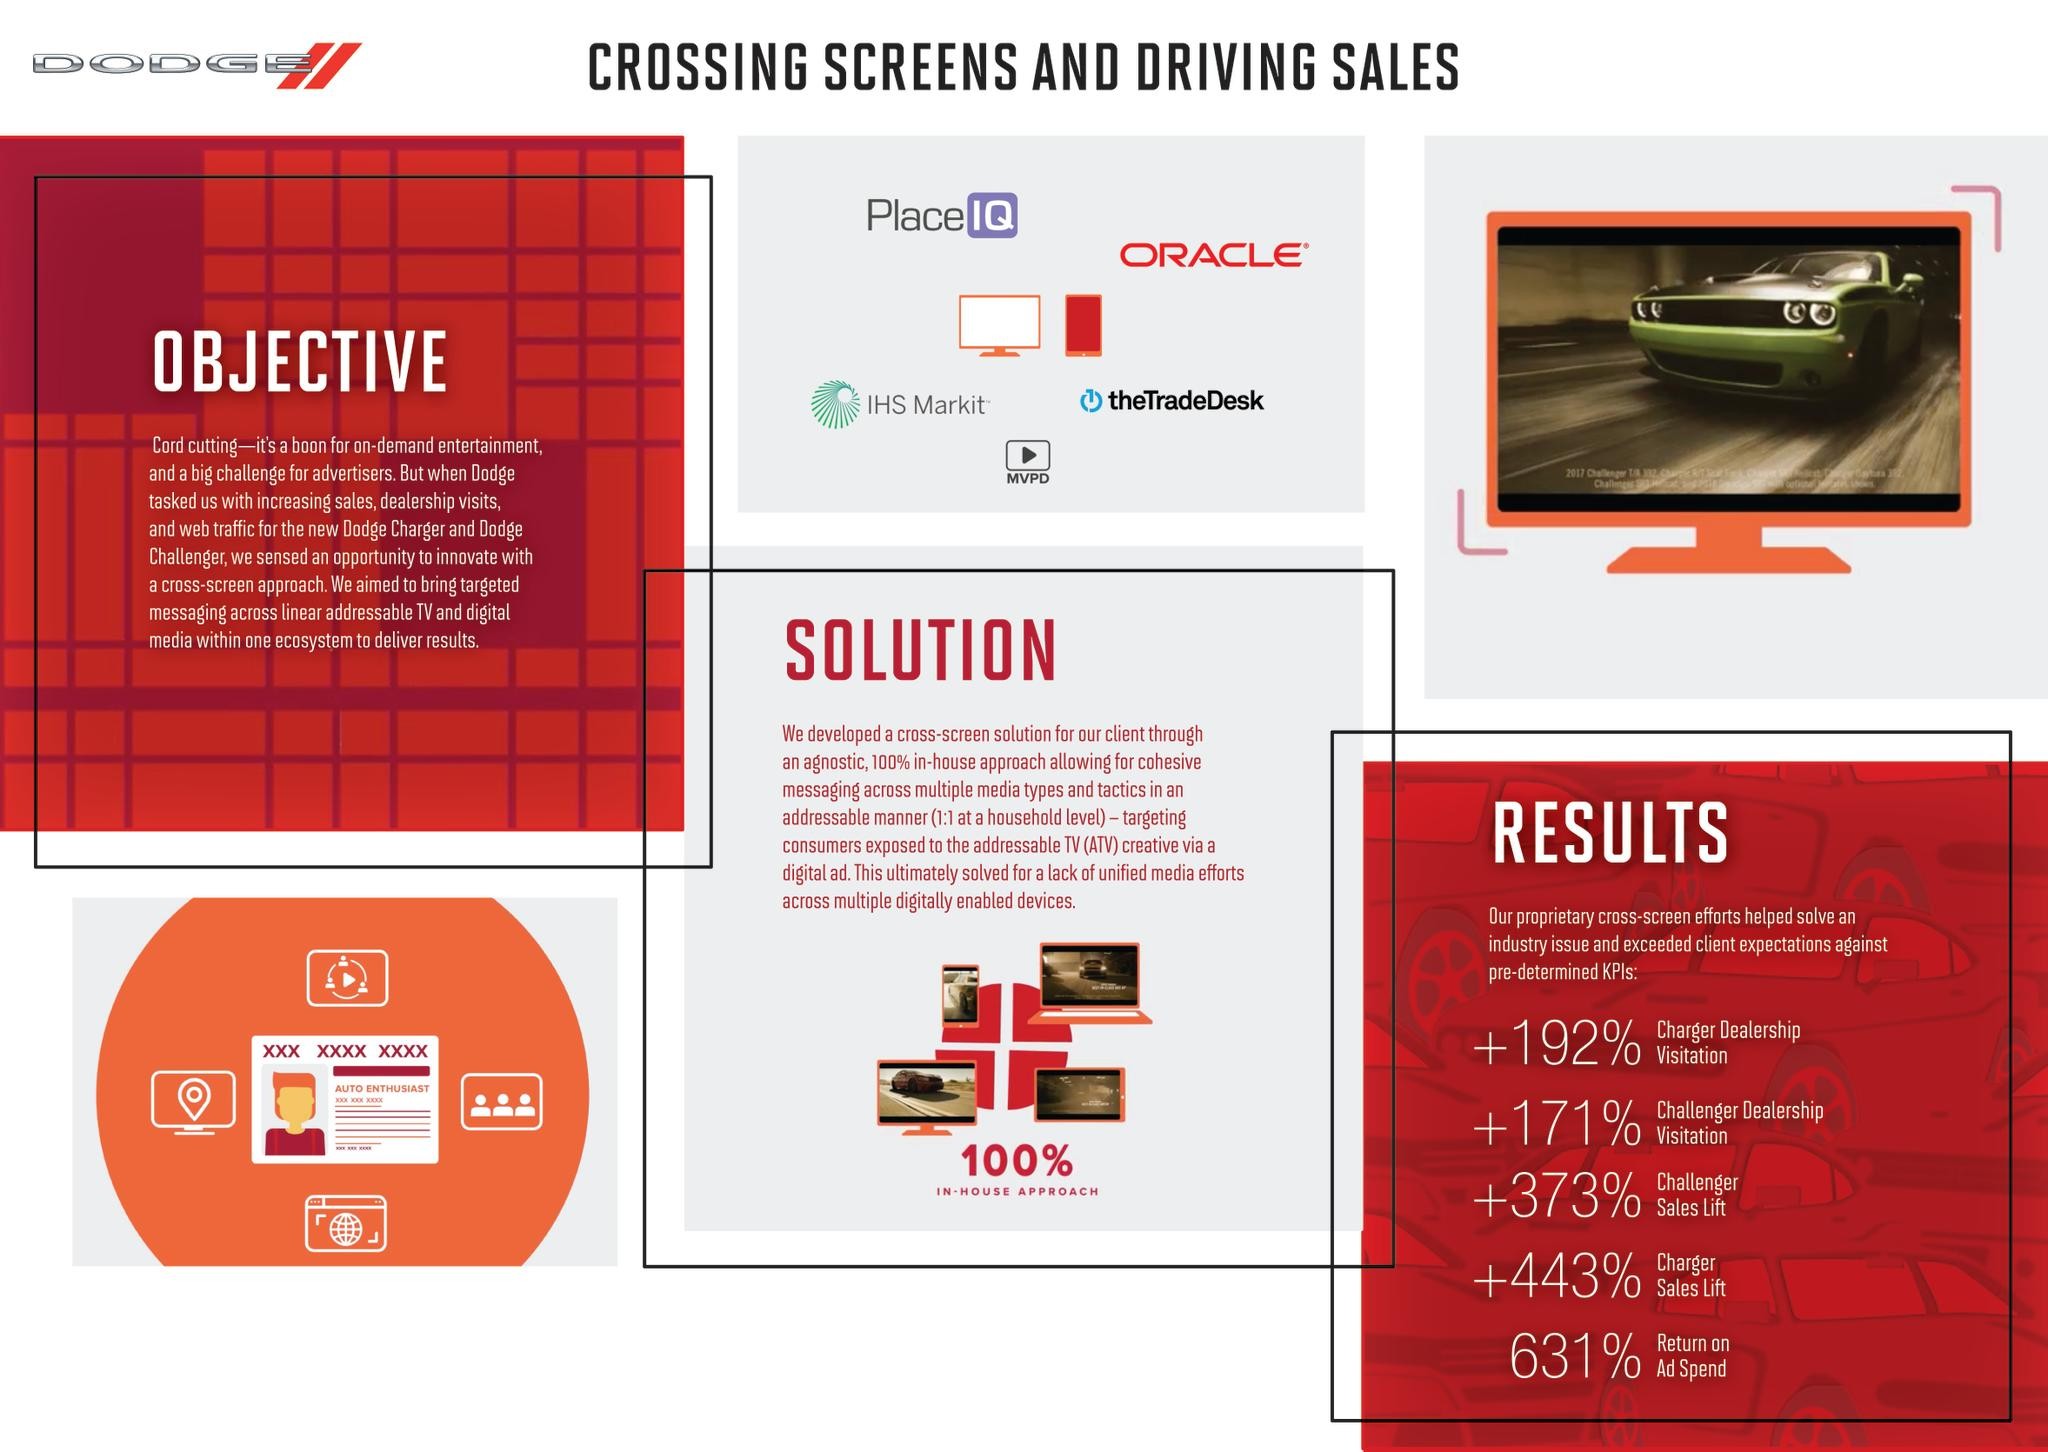 Crossing Screens and Driving Sales